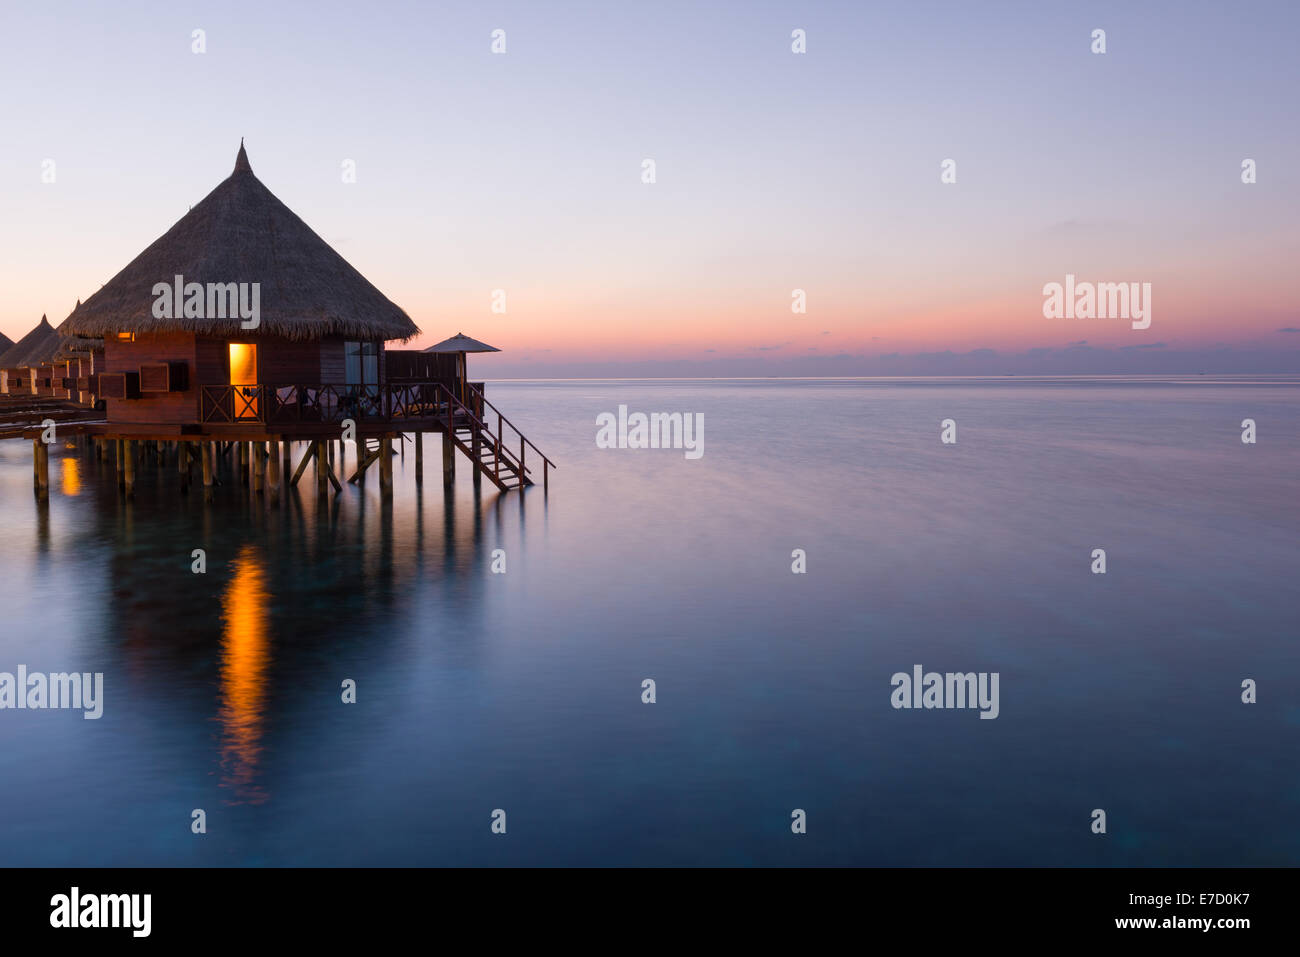 Panorama of tropical island resort with over-water bungalows at night. Maldives. Ari Atoll.  Scenic sunset over the Ocean. Stock Photo